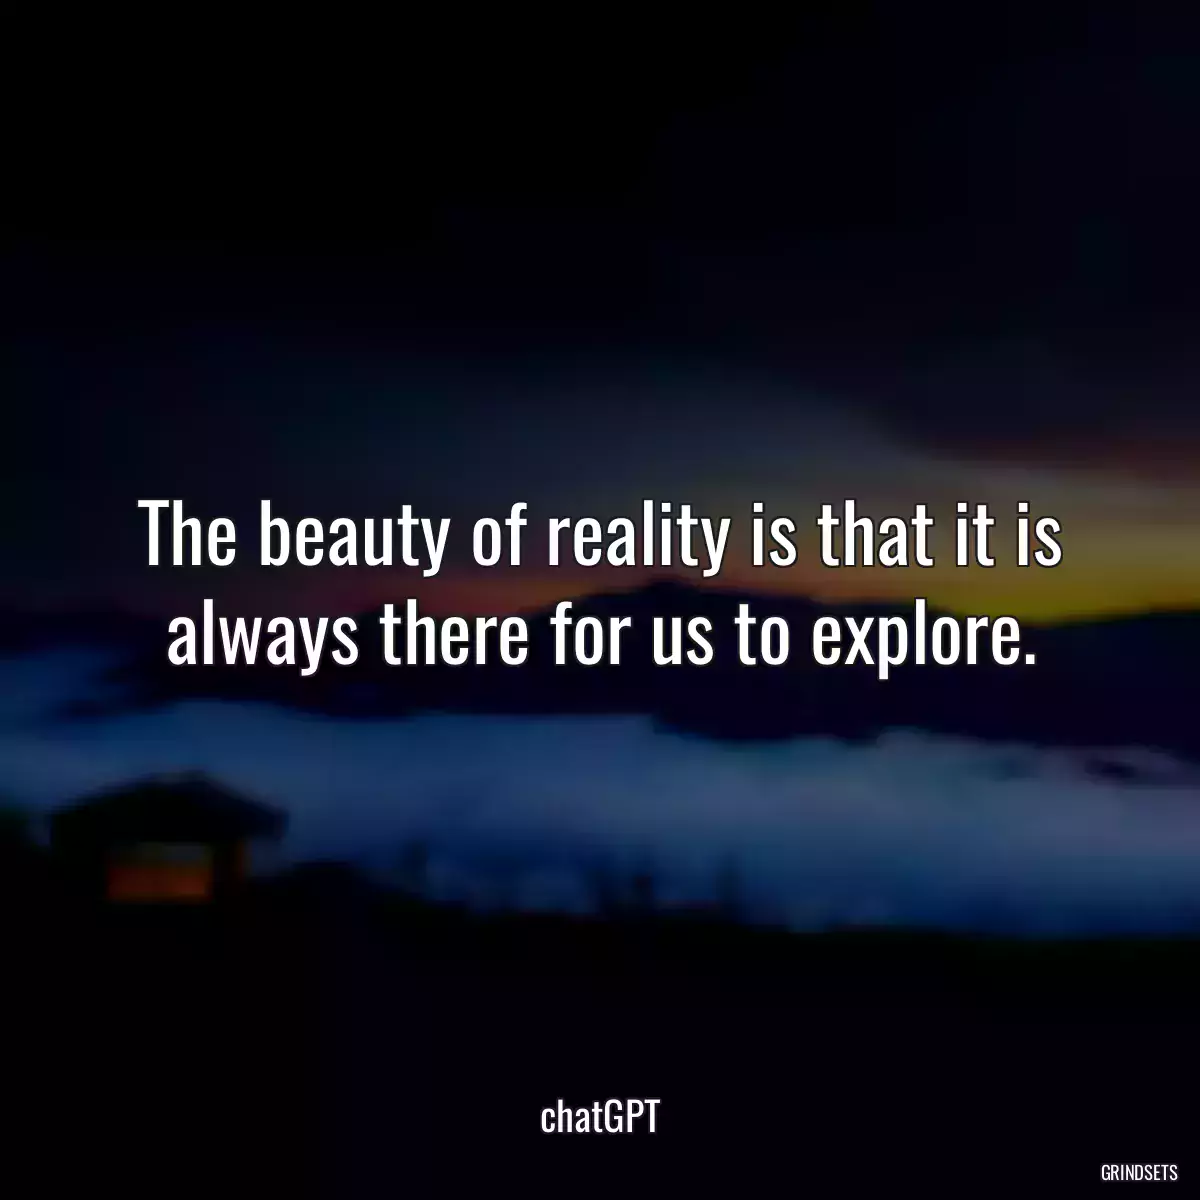 The beauty of reality is that it is always there for us to explore.